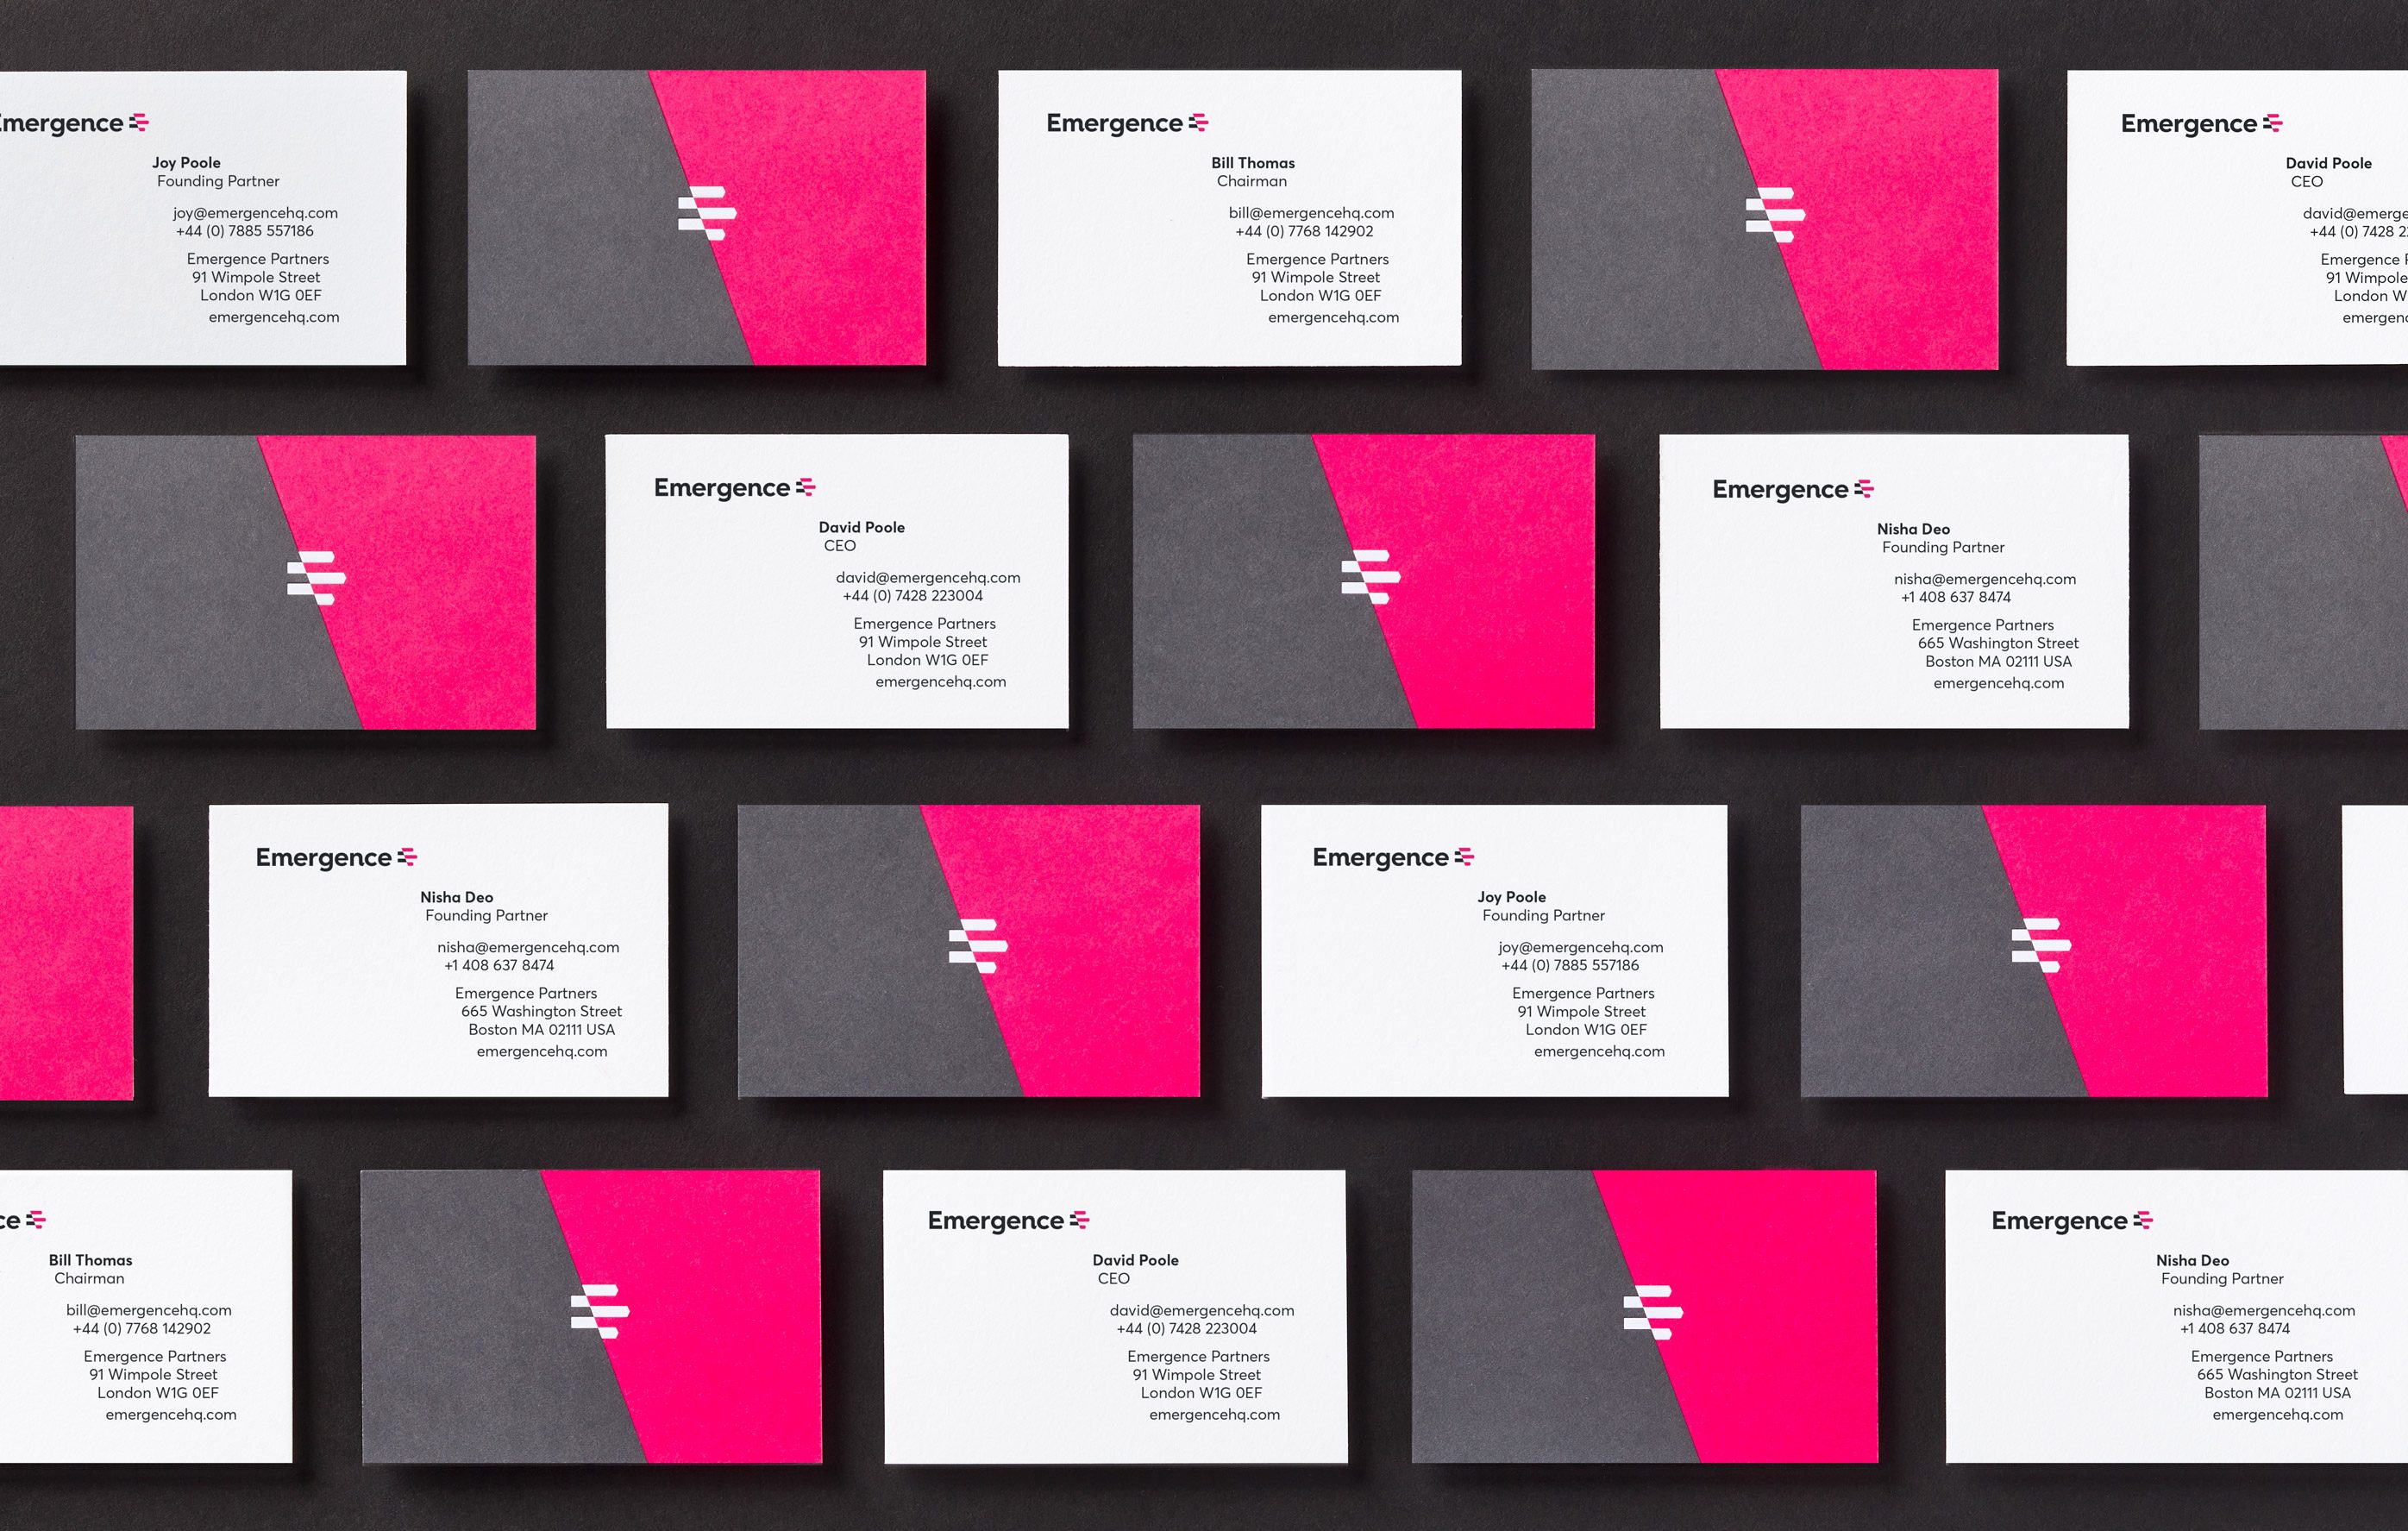 Business card designs lined-up against black background